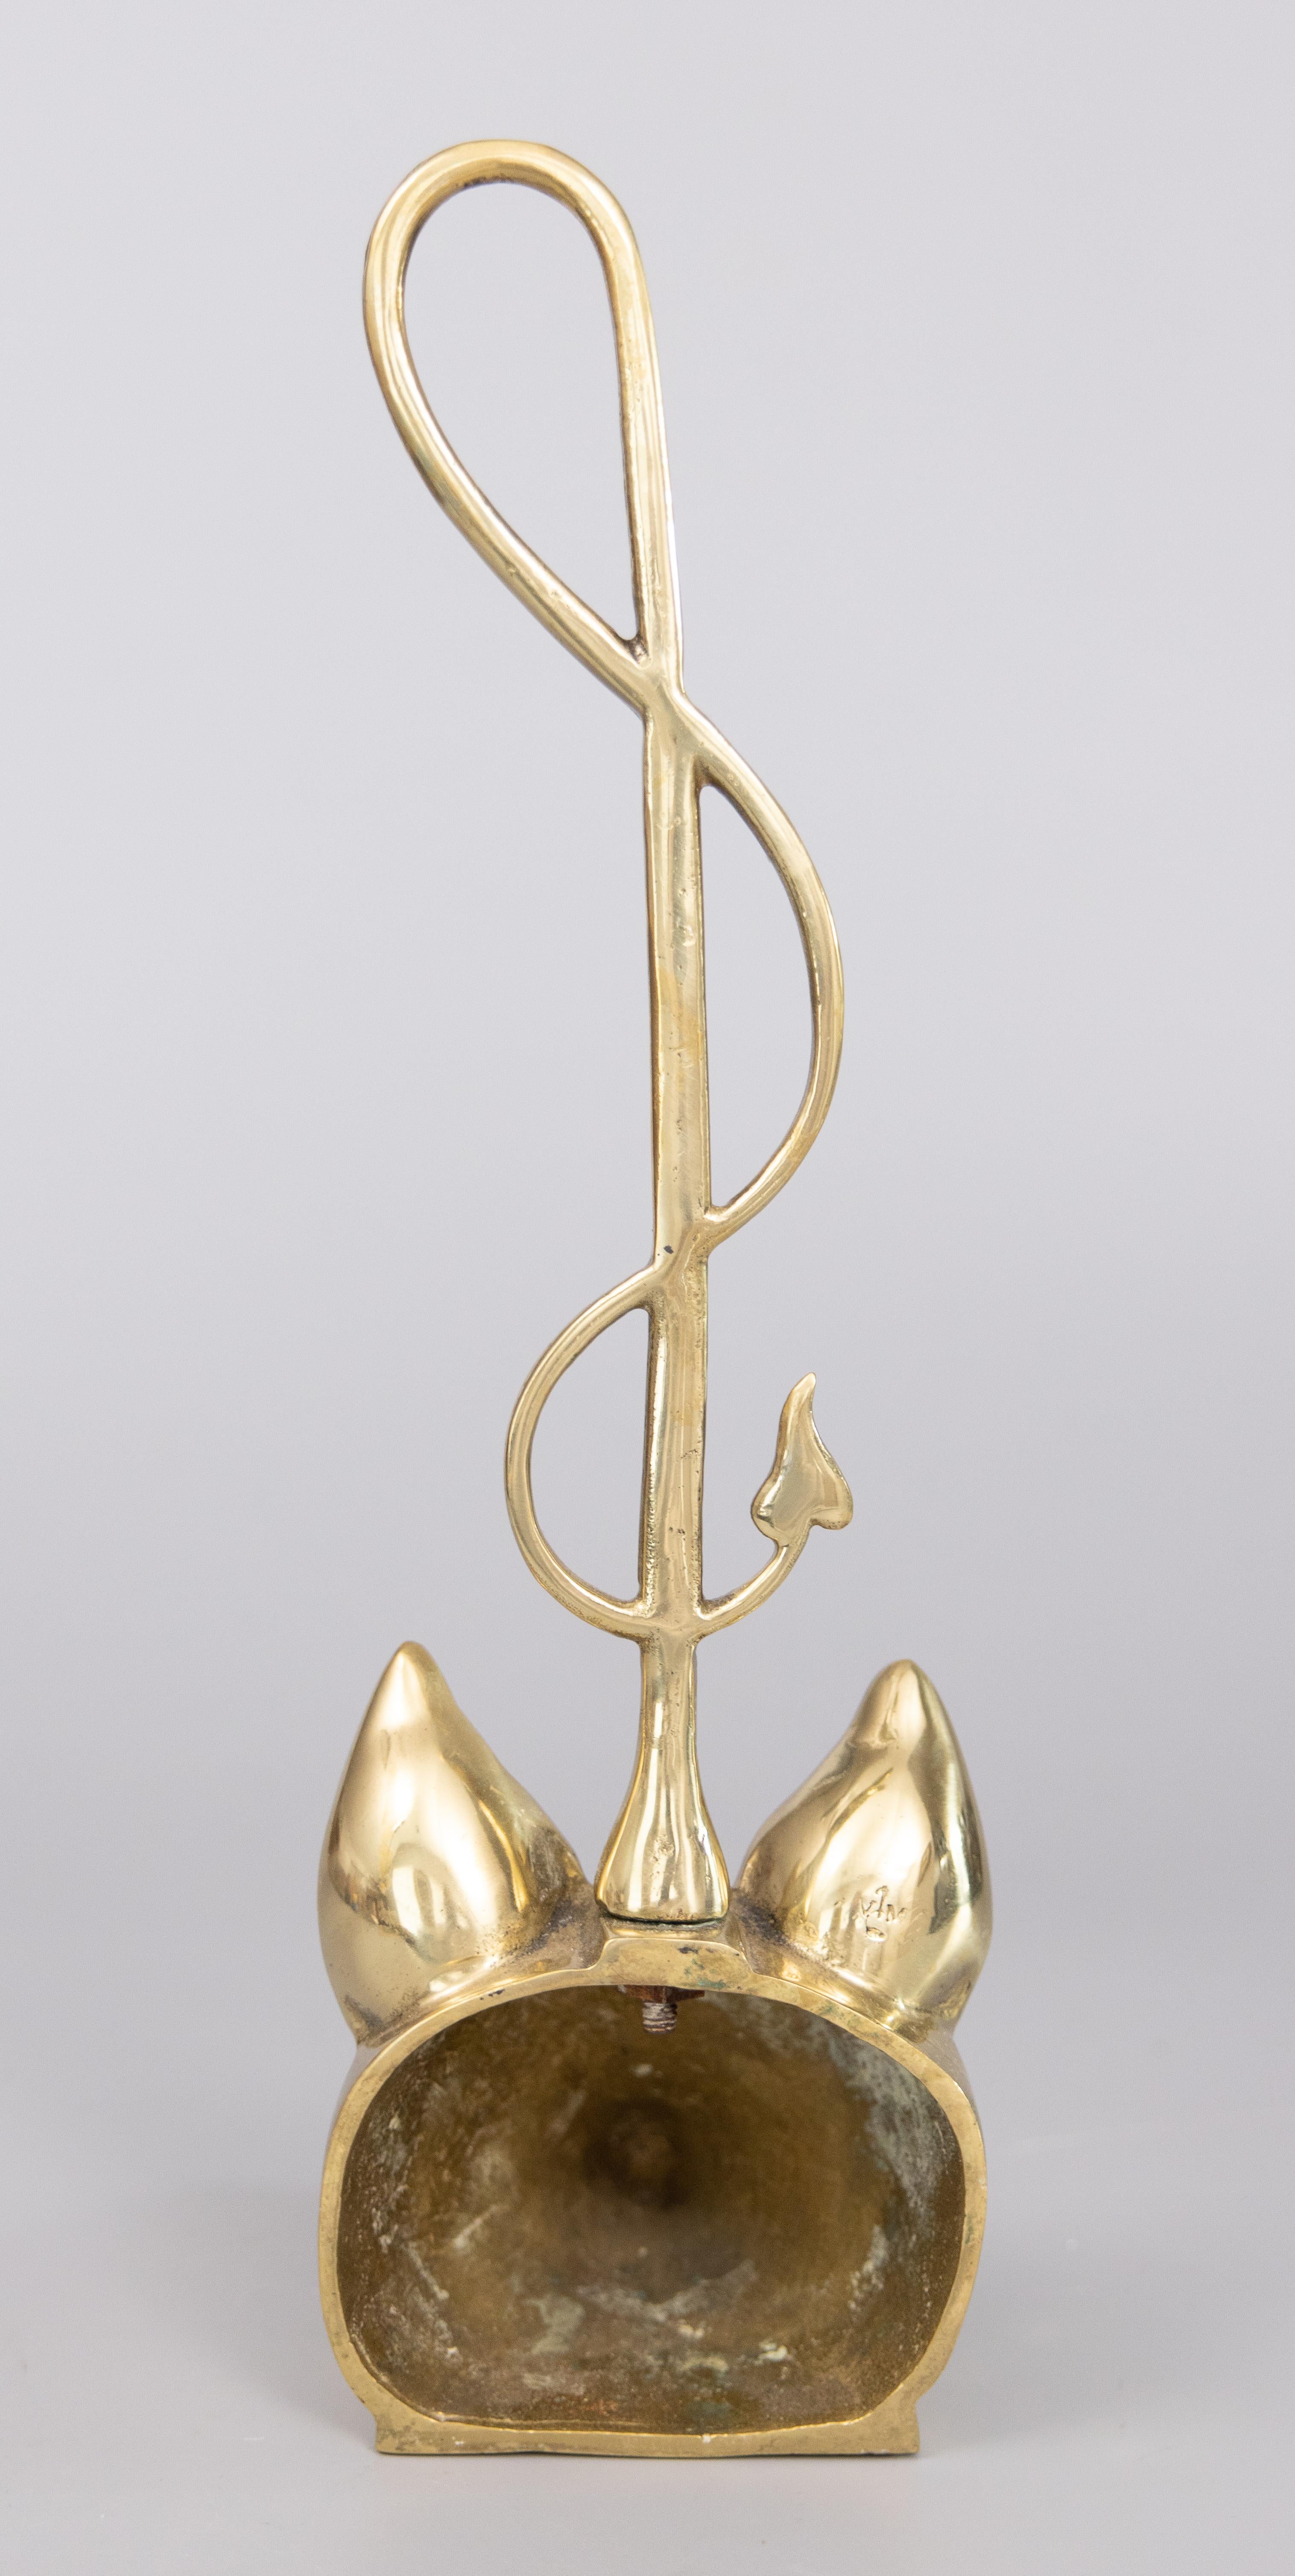 Edwardian Style Brass Fox with Riding Crop Doorstop In Good Condition For Sale In Pearland, TX